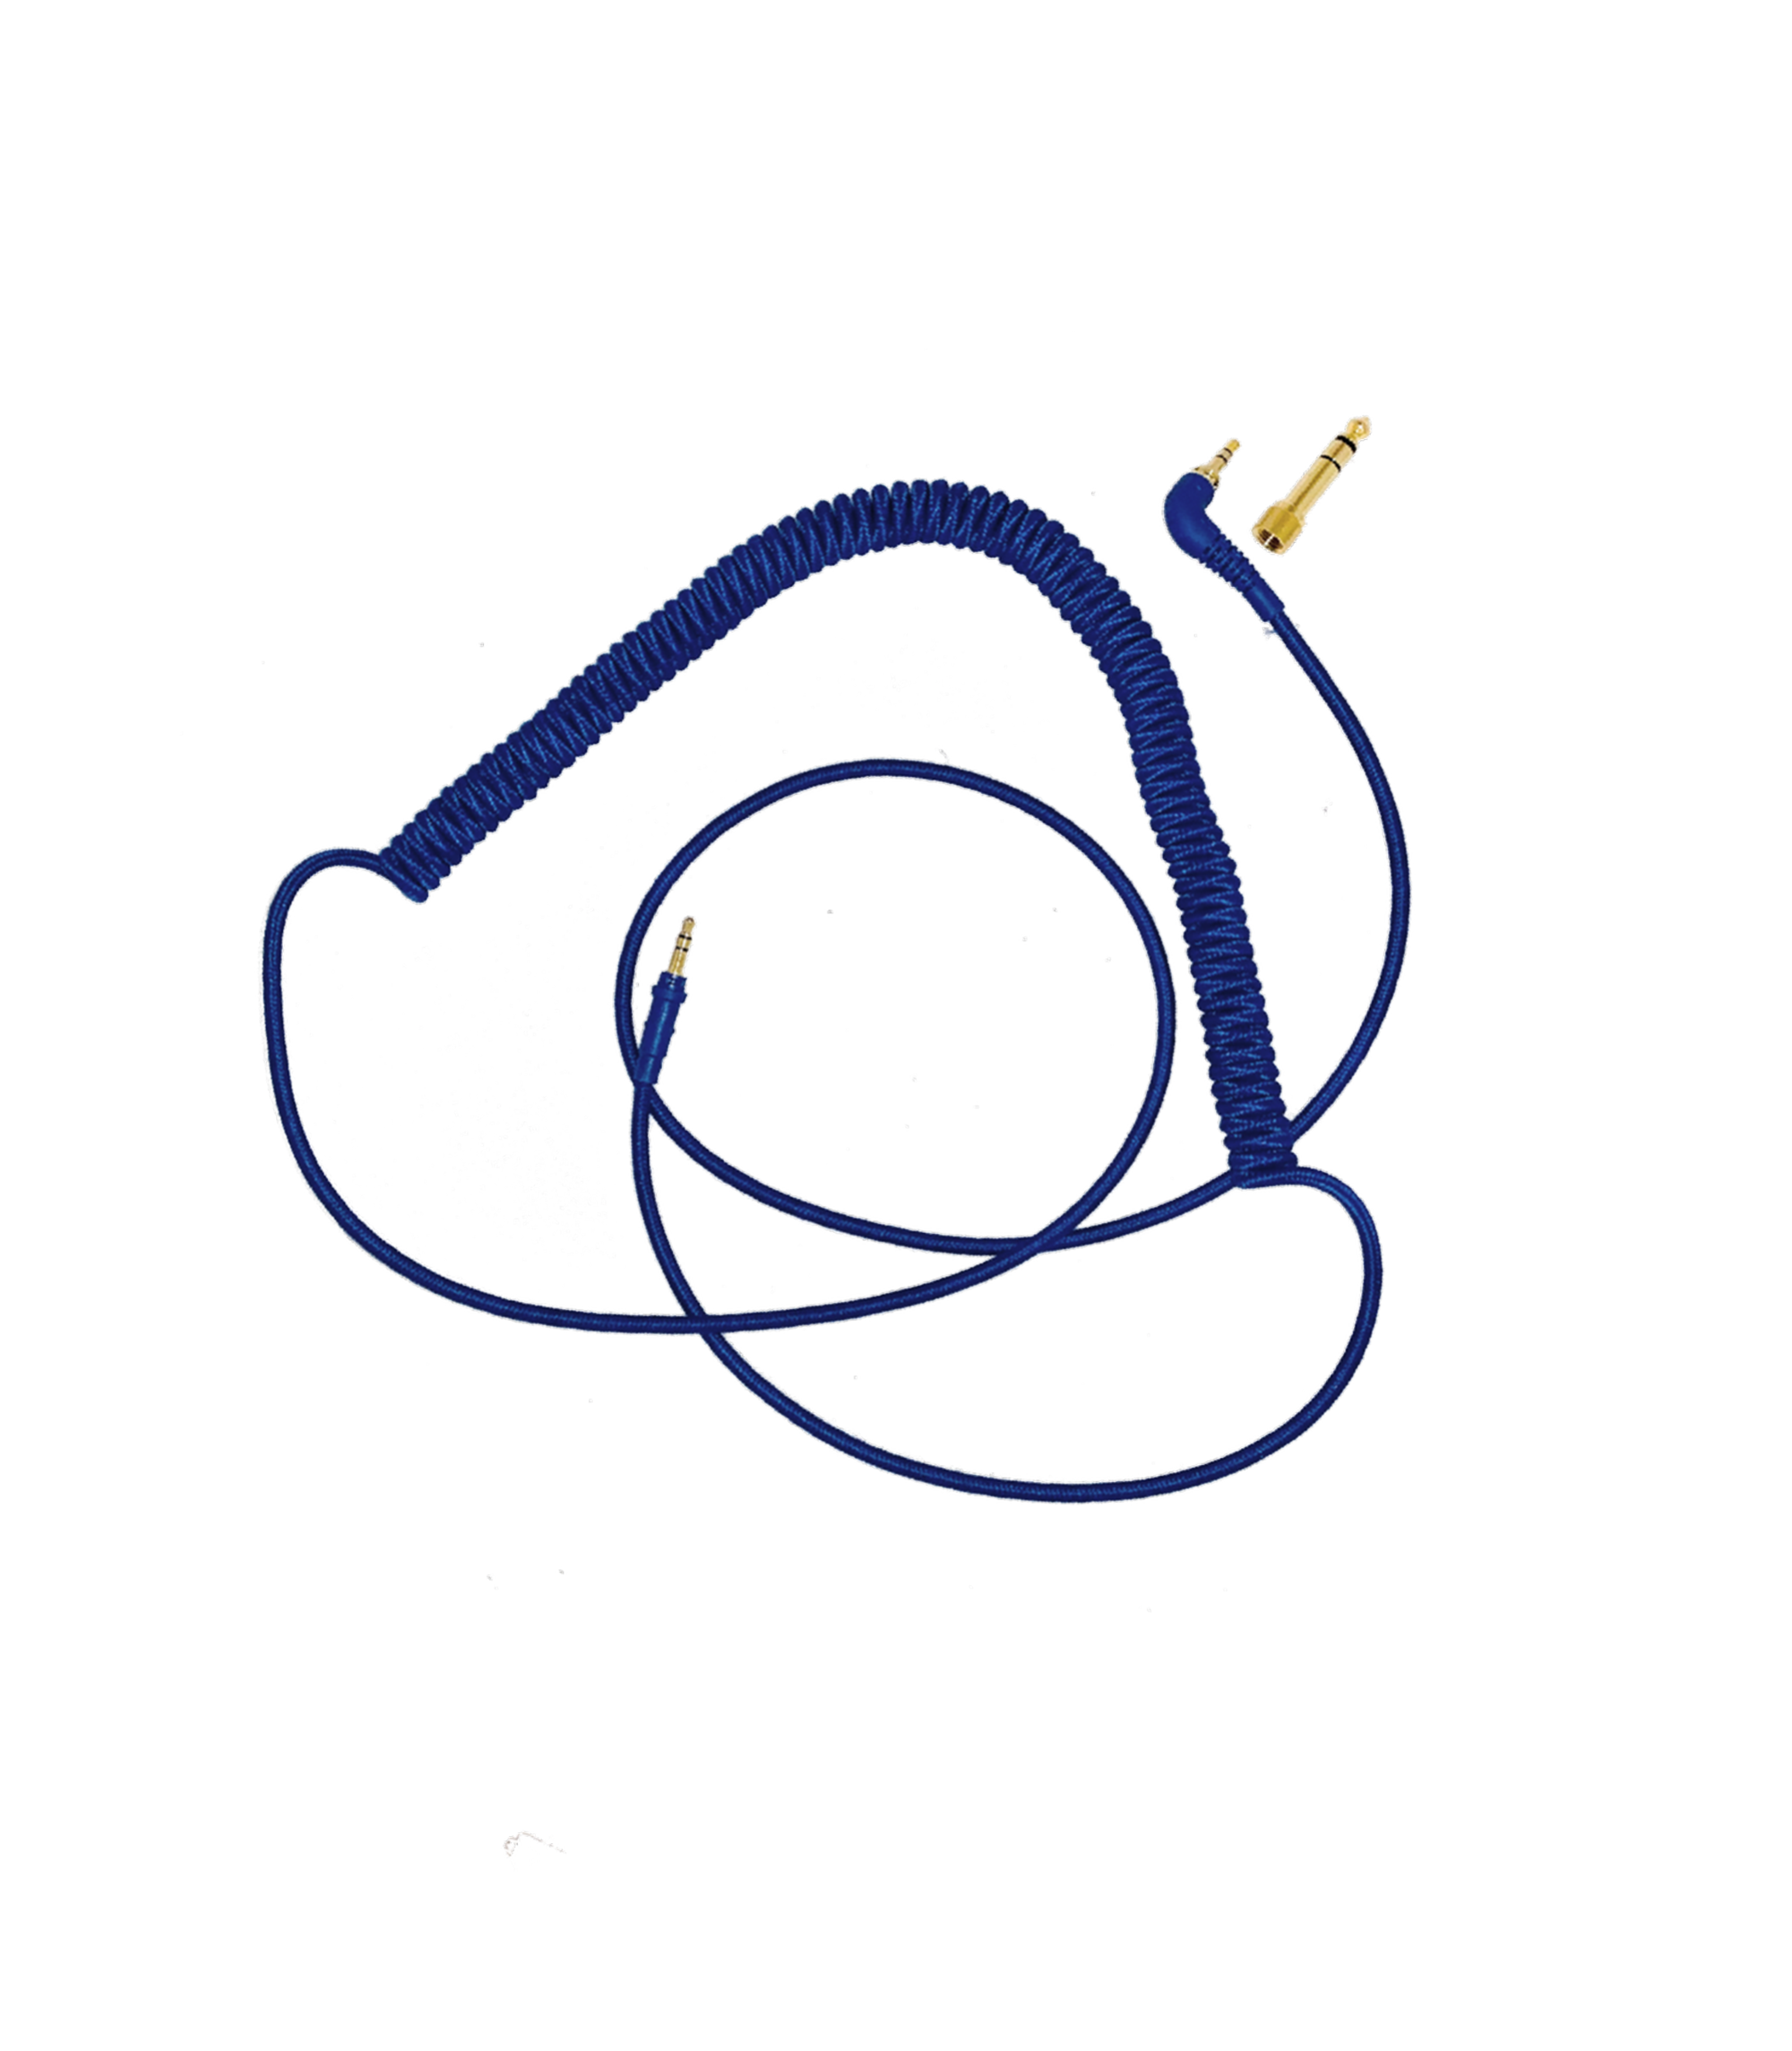 AIAIAI - C74 - Blue woven coiled cable - 1.5m